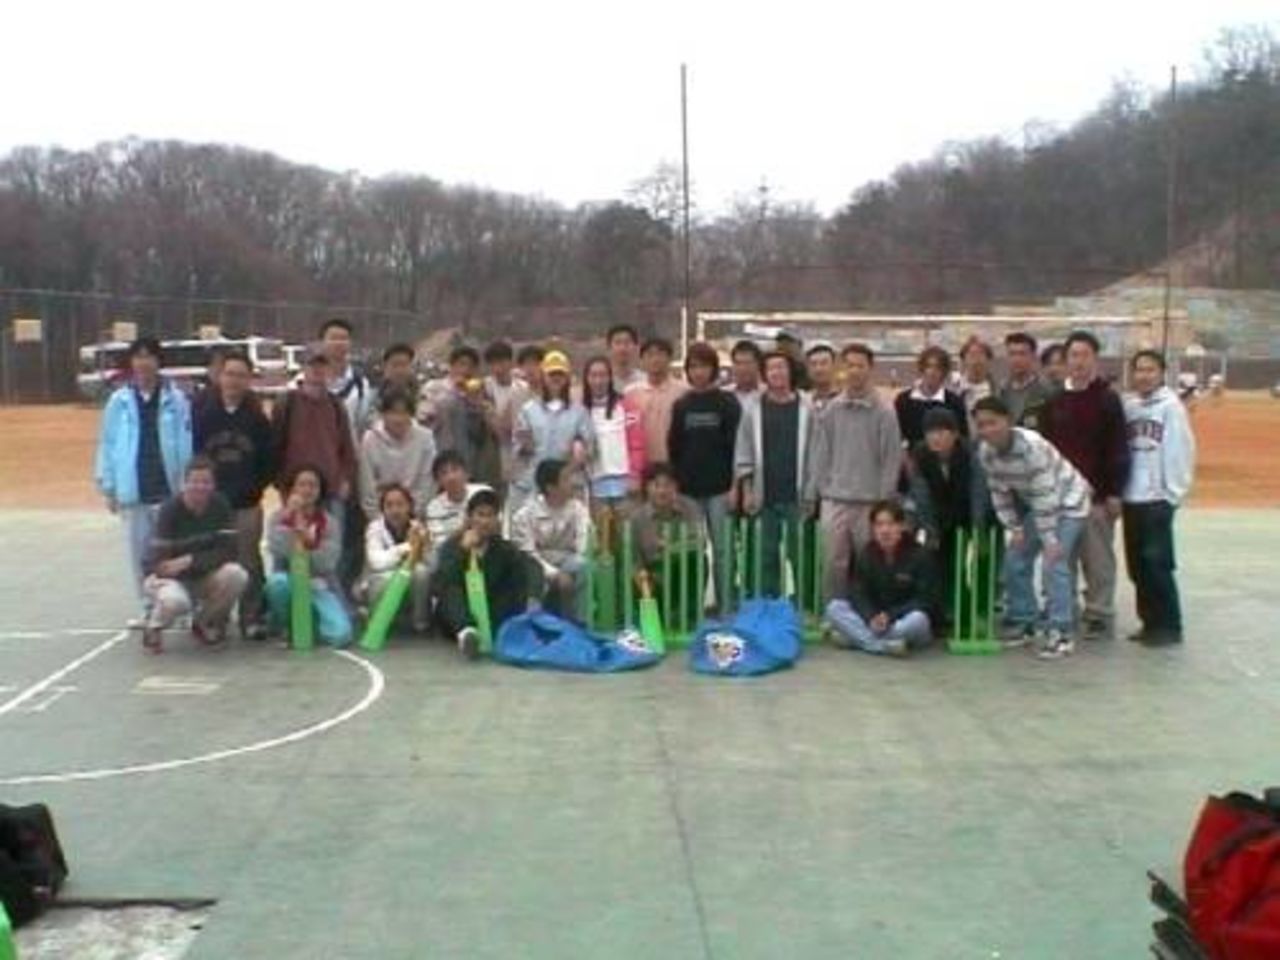 Group shot of the previously reported Korea University cricket course class